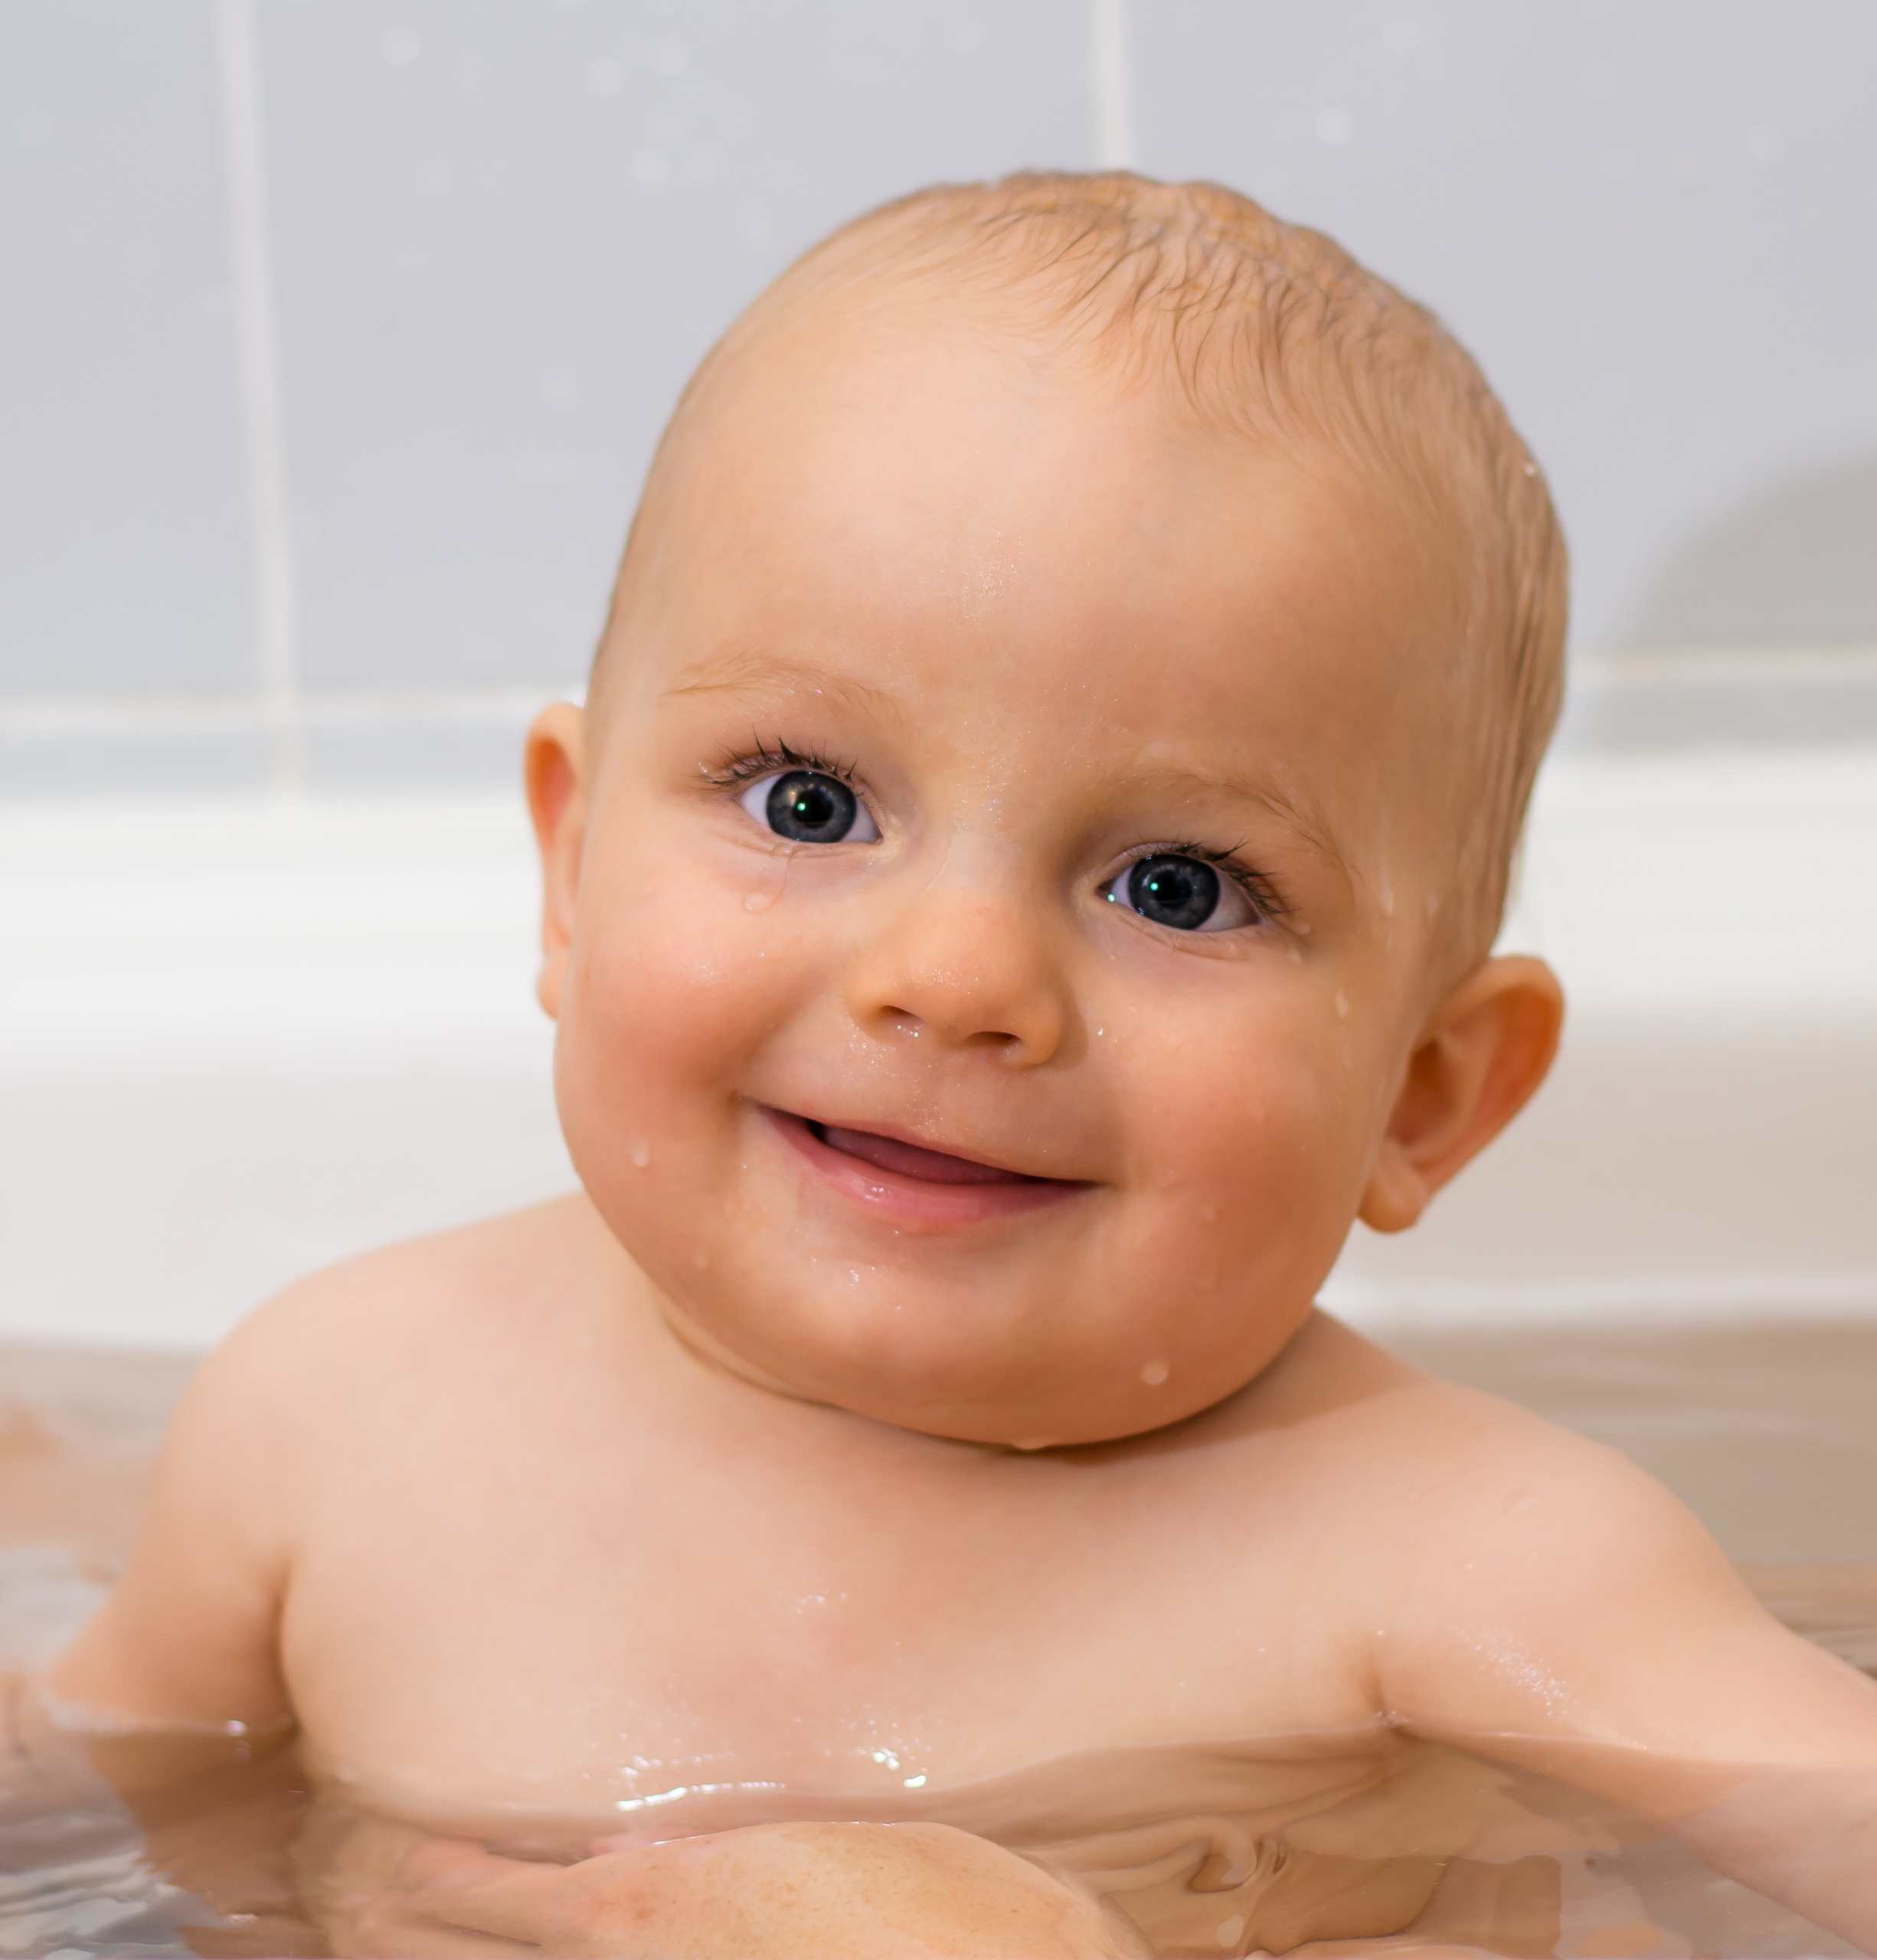 http://kidpt.com/wp-content/uploads/2020/01/Canva-Baby-Taking-a-Bath-scaled.jpg